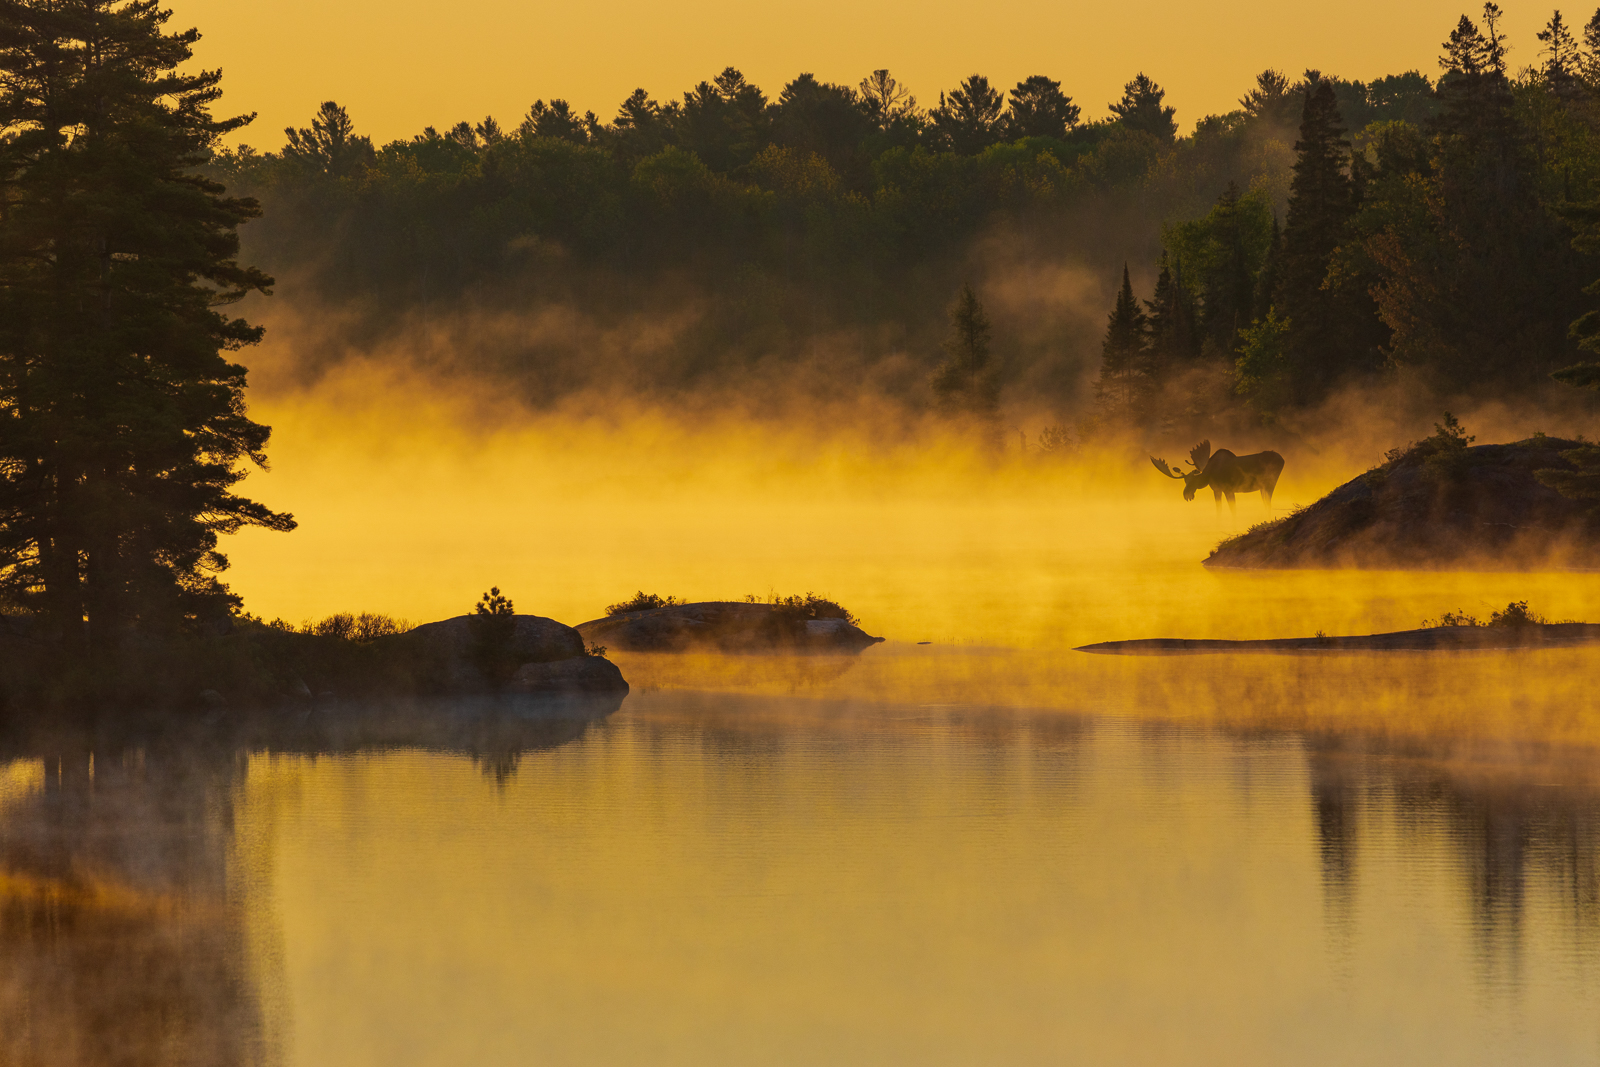 a glassy lake covered in mist at sunrise, with rocky shores and forest silhouetted against the soft light. On the far bank, there is an outline of a large bull moose standing in the mist.